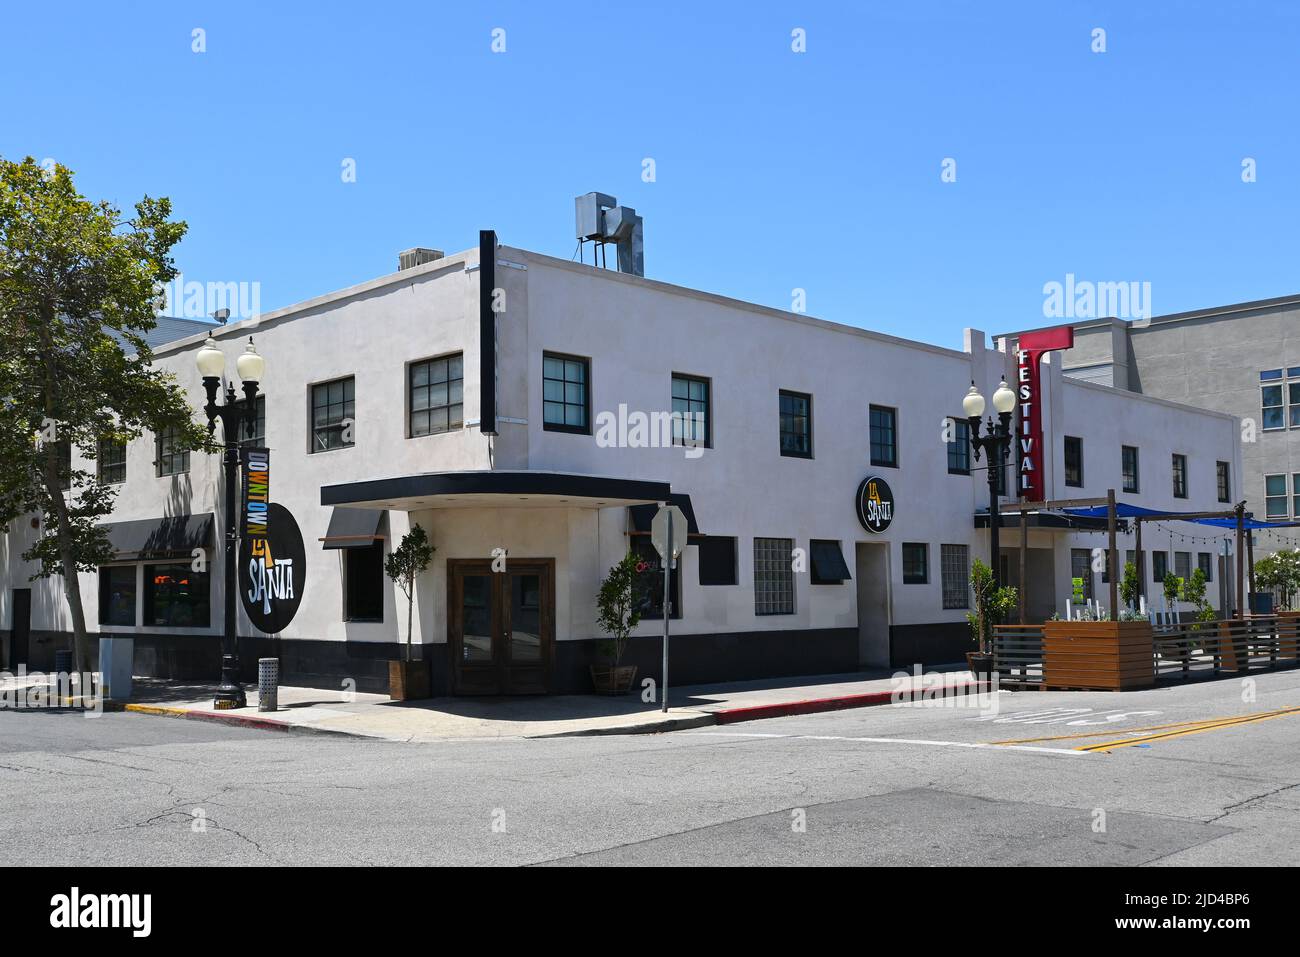 SANTA ANA, CALIFORNIA - 17 JUN 2022: La Santa an intimate Live Music Venue, with bar and diner, in the historic downtown district. Stock Photo